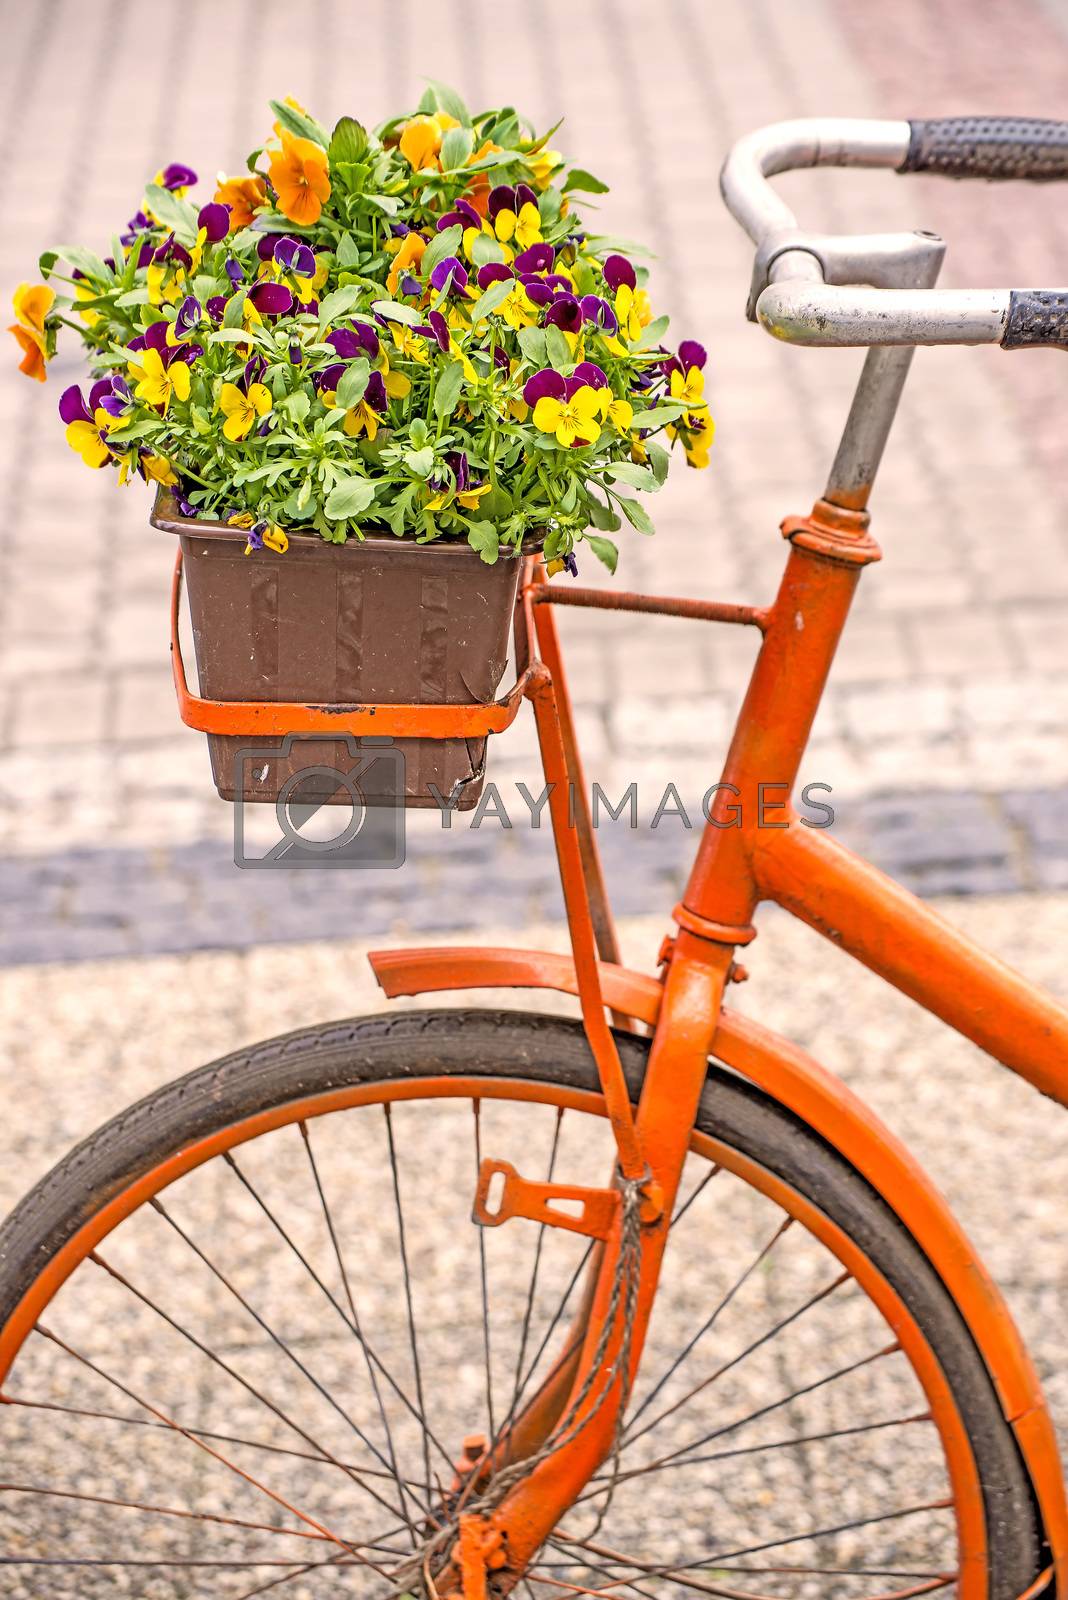 Royalty free image of bicycle with flowers by Jochen